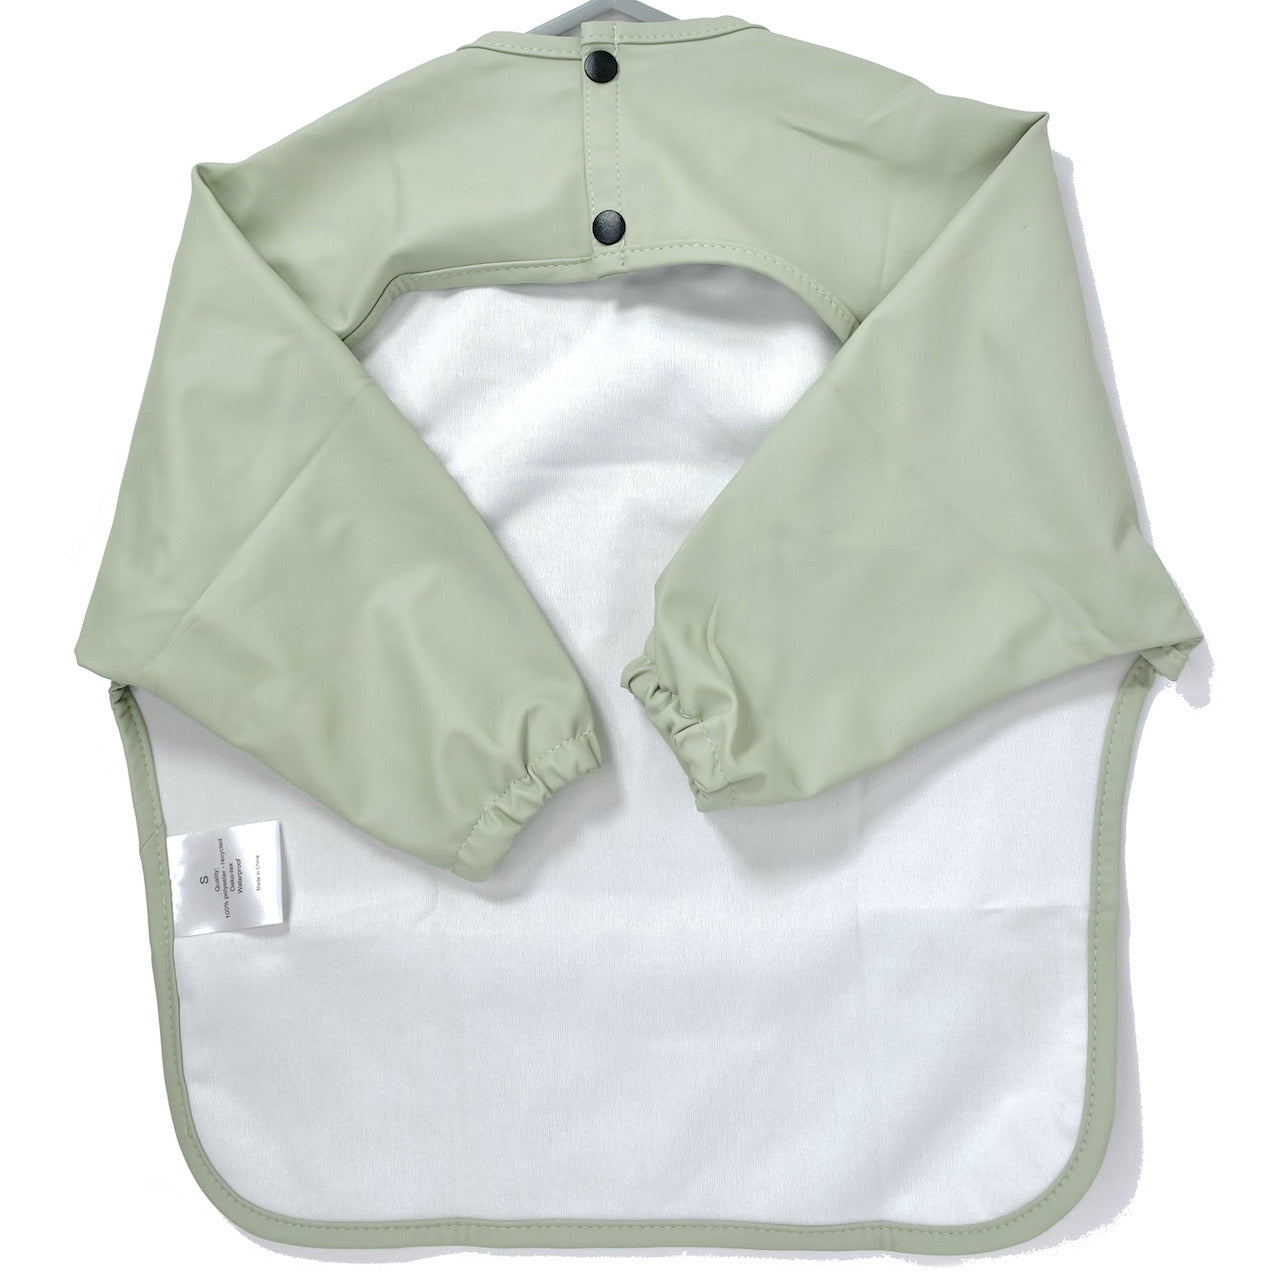 Long-sleeve kids apron in a pistachio green colour, showing front view.